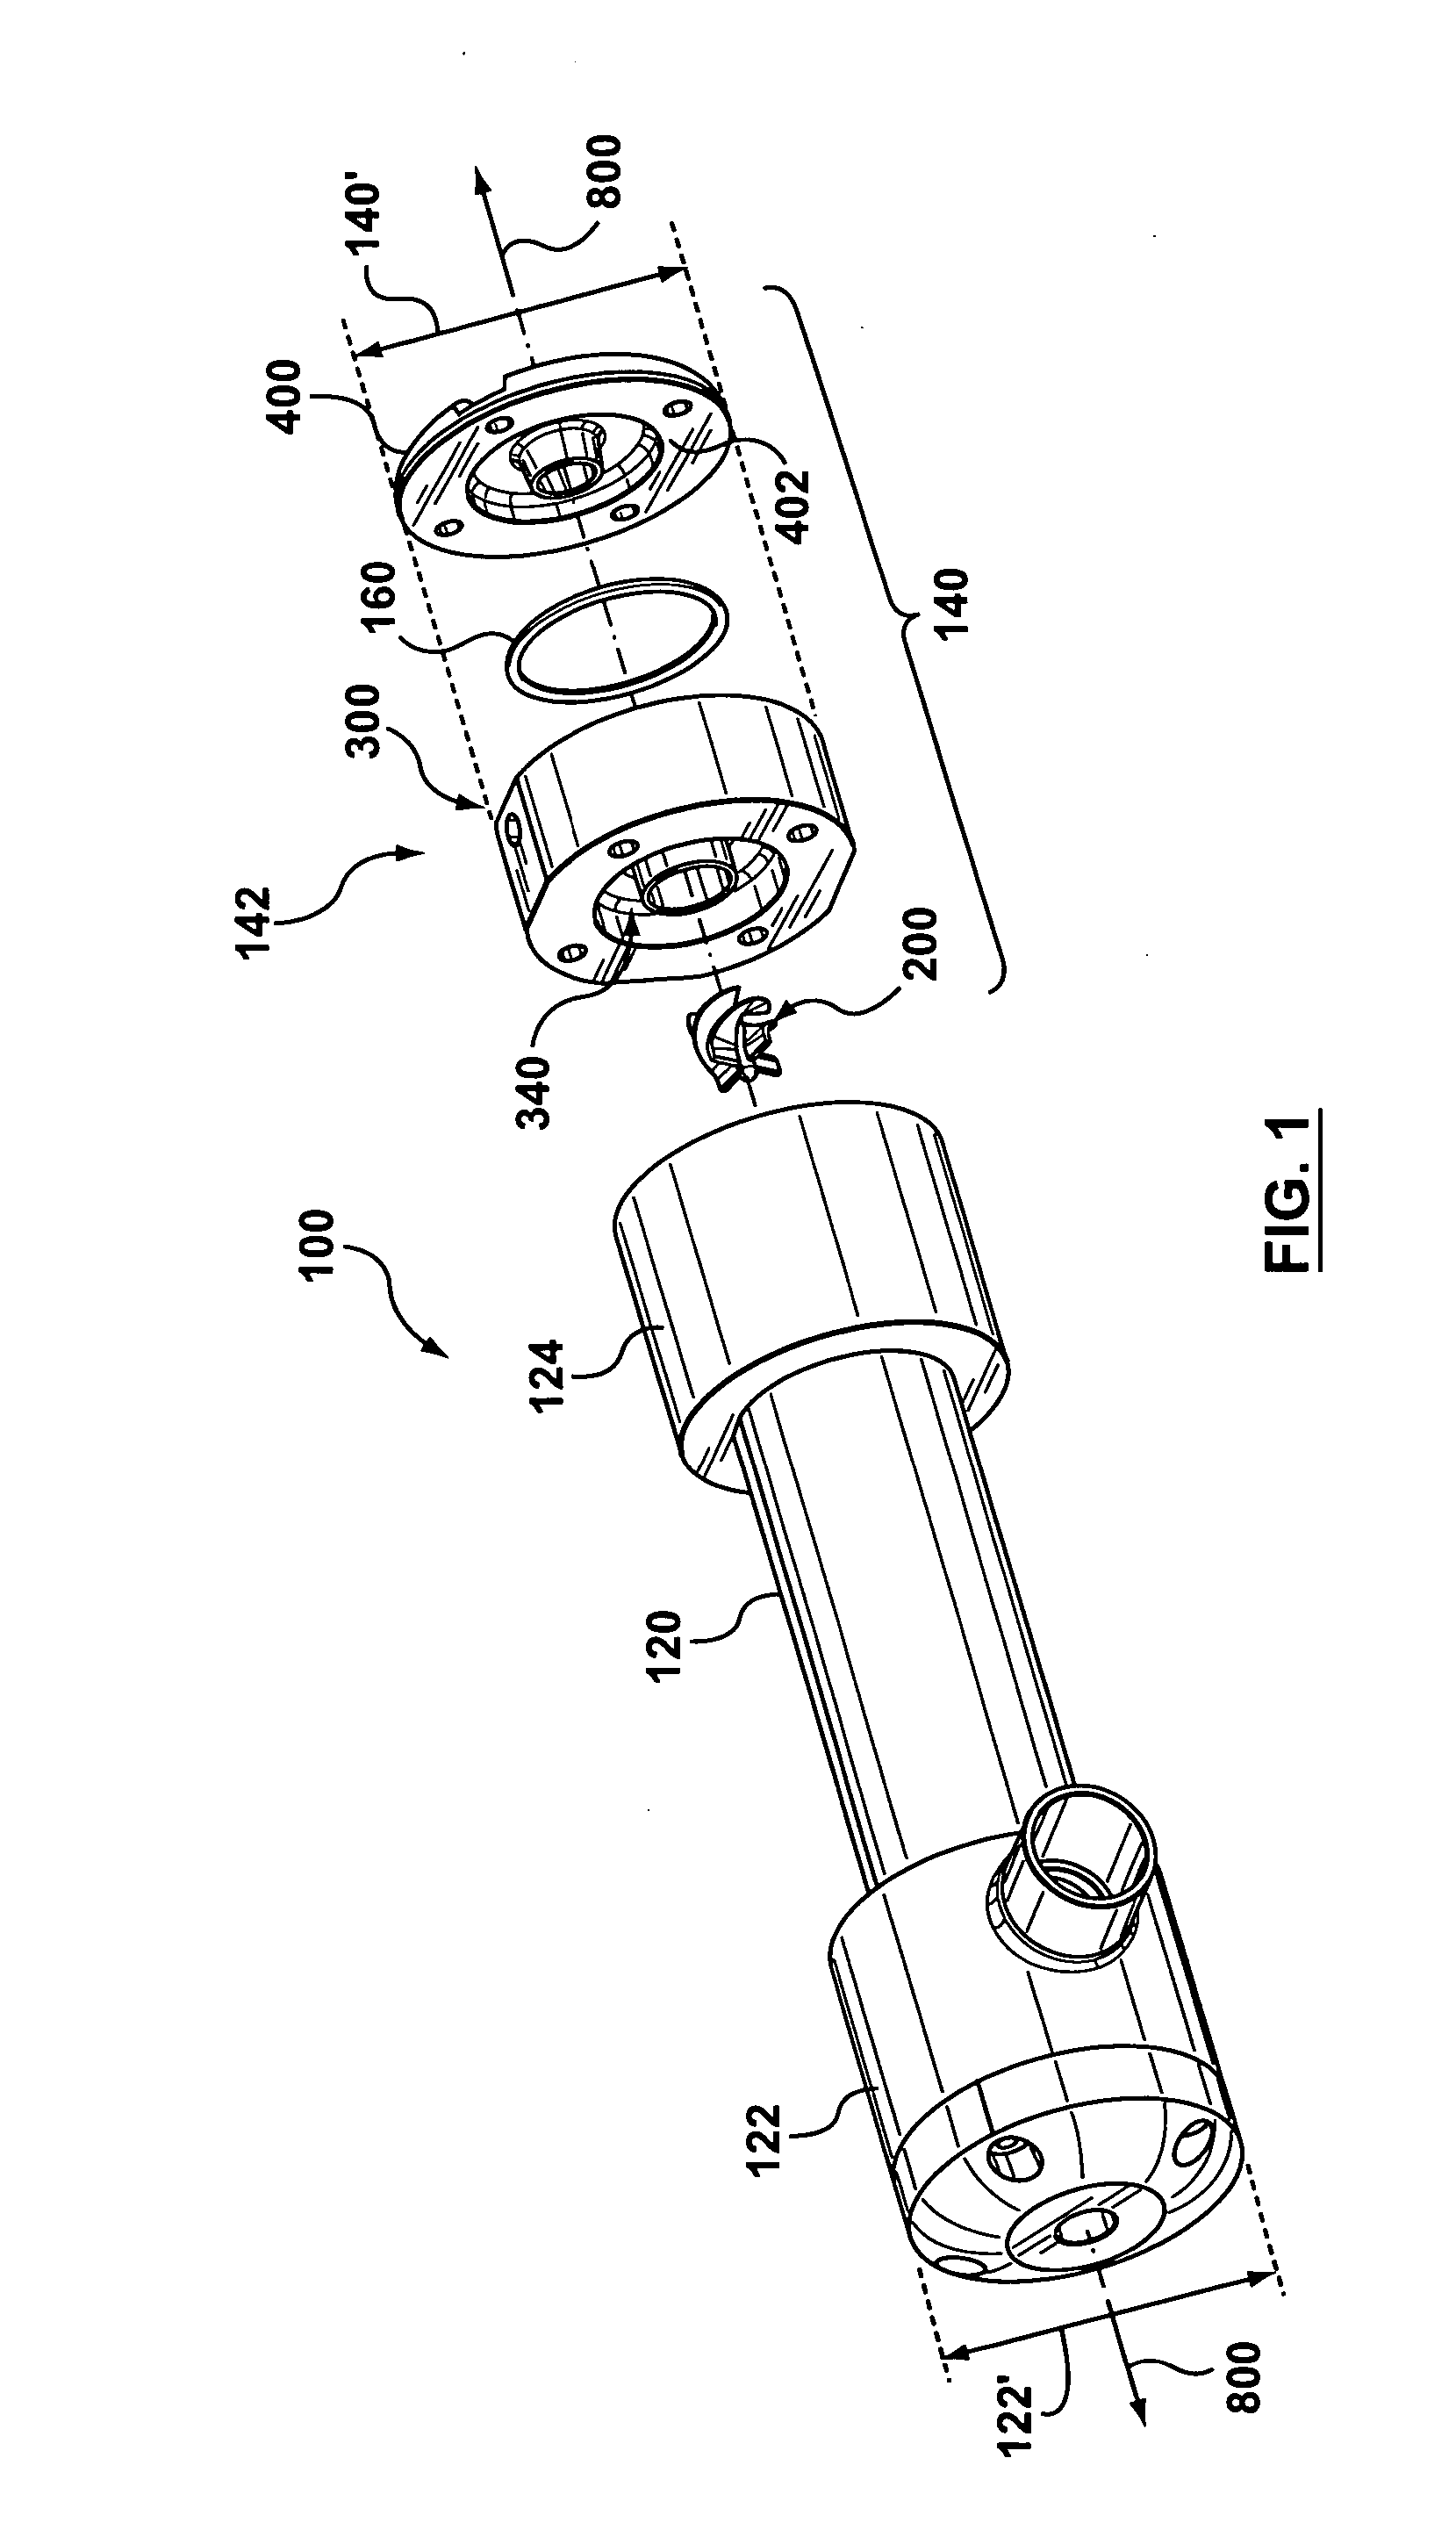 Energy and/or mass exchange apparatus having an integrated fluid separator